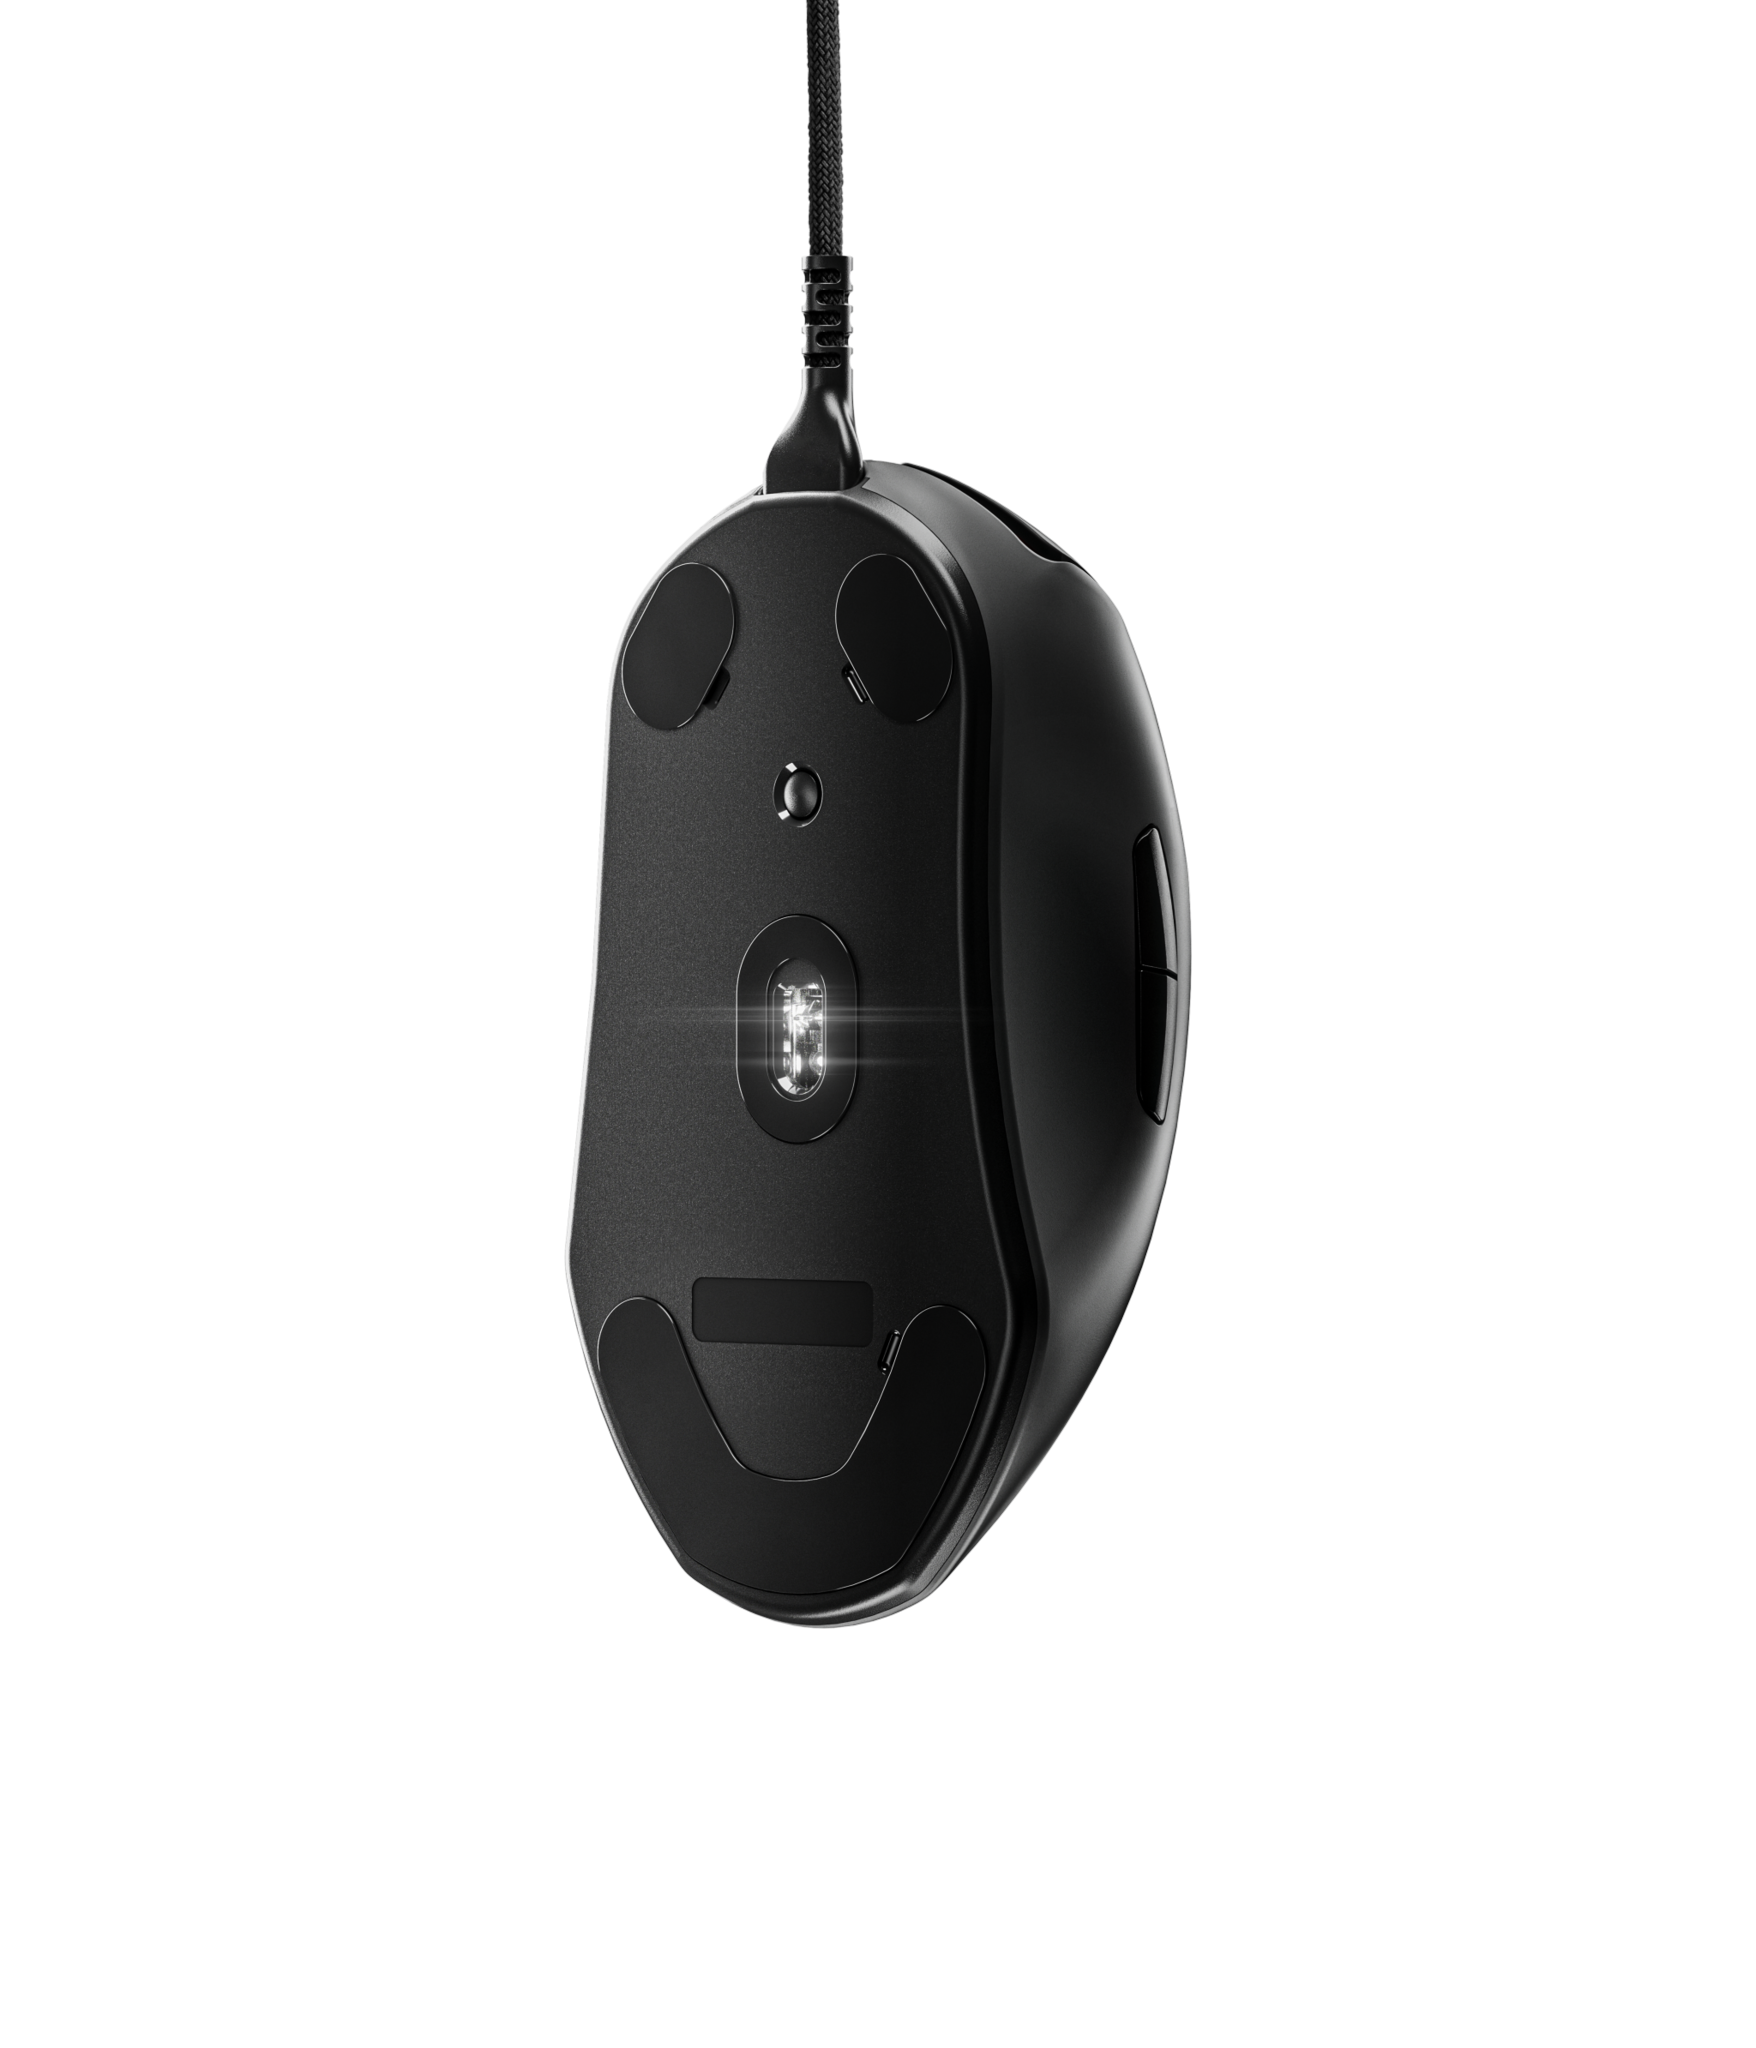 Steelseries - Prime Mouse - Gaming Mouse